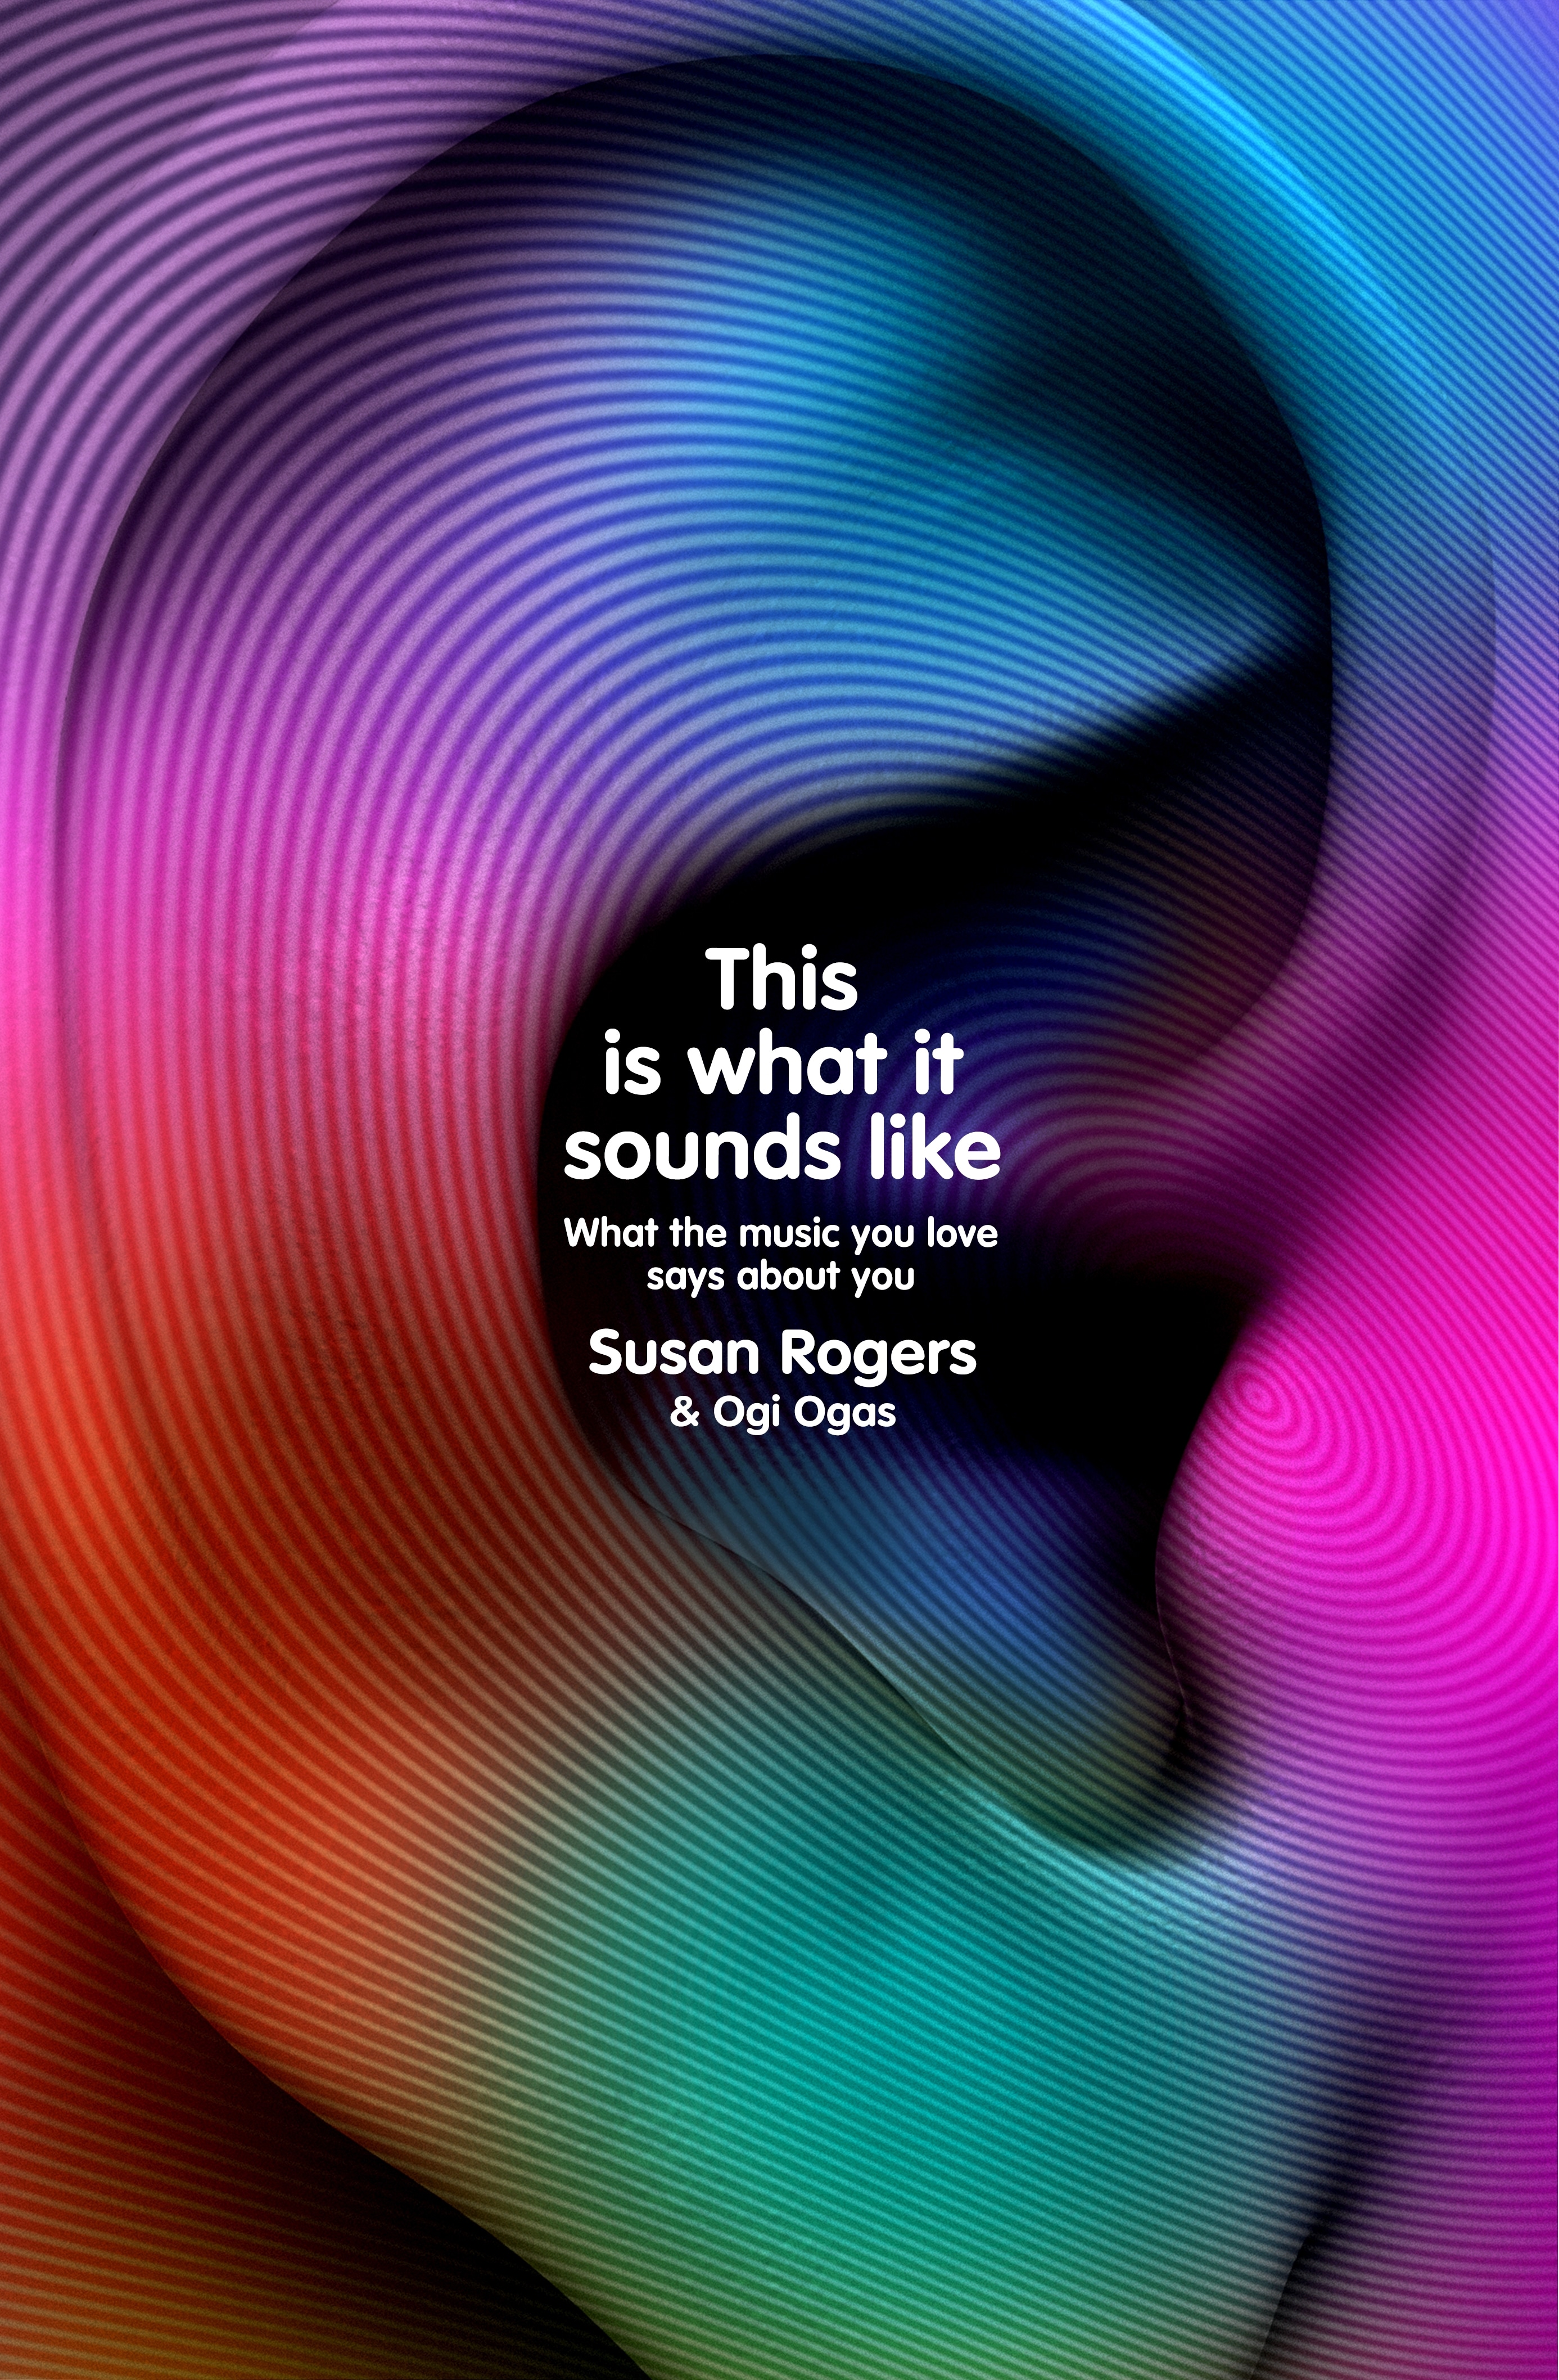 Book “This Is What It Sounds Like” by Dr. Susan Rogers — October 6, 2022